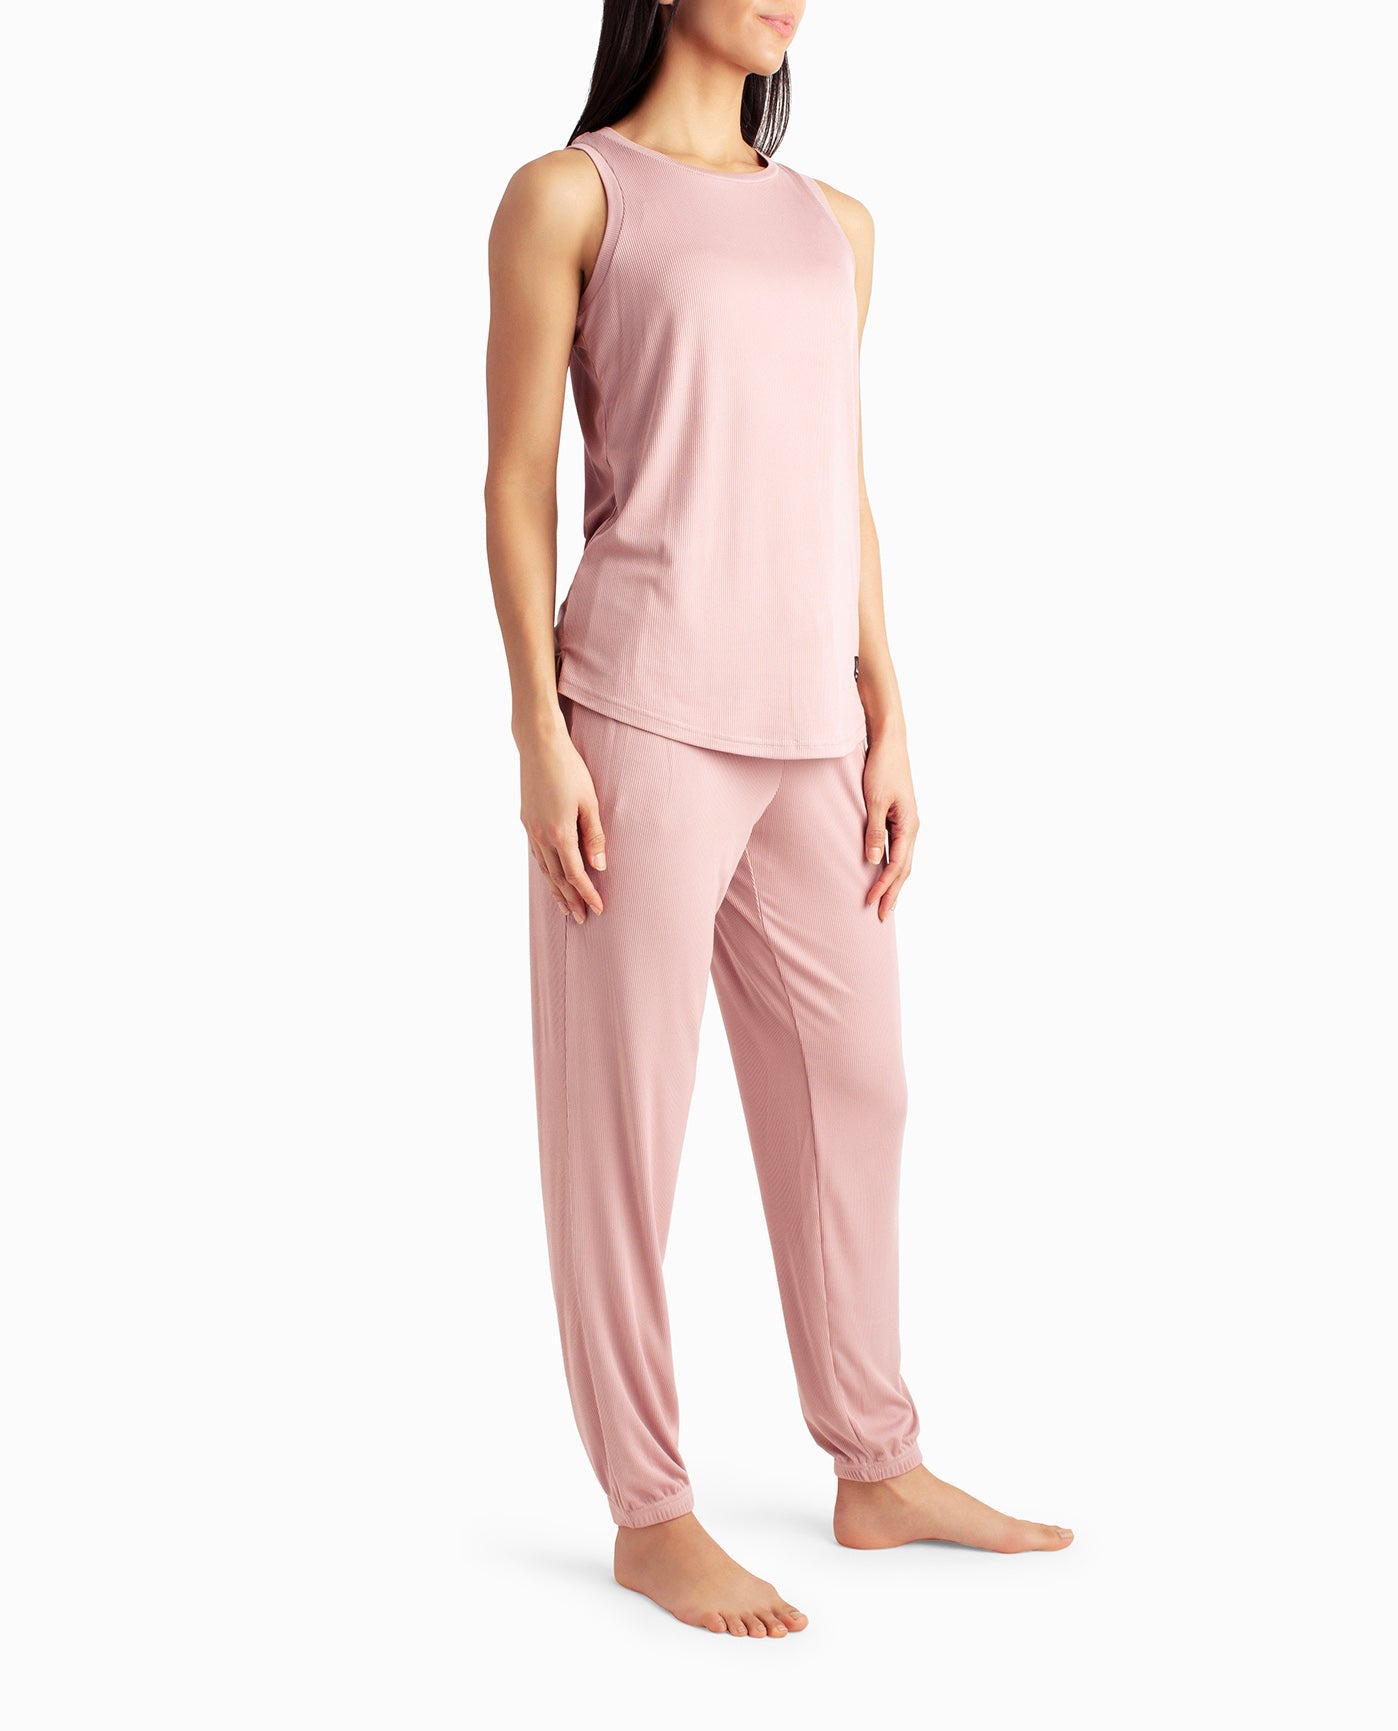 SIDE OF RIBBED HIGH NECK TANK AND GYM PANT TWO-PIECE SLEEPWEAR SET | Gemini